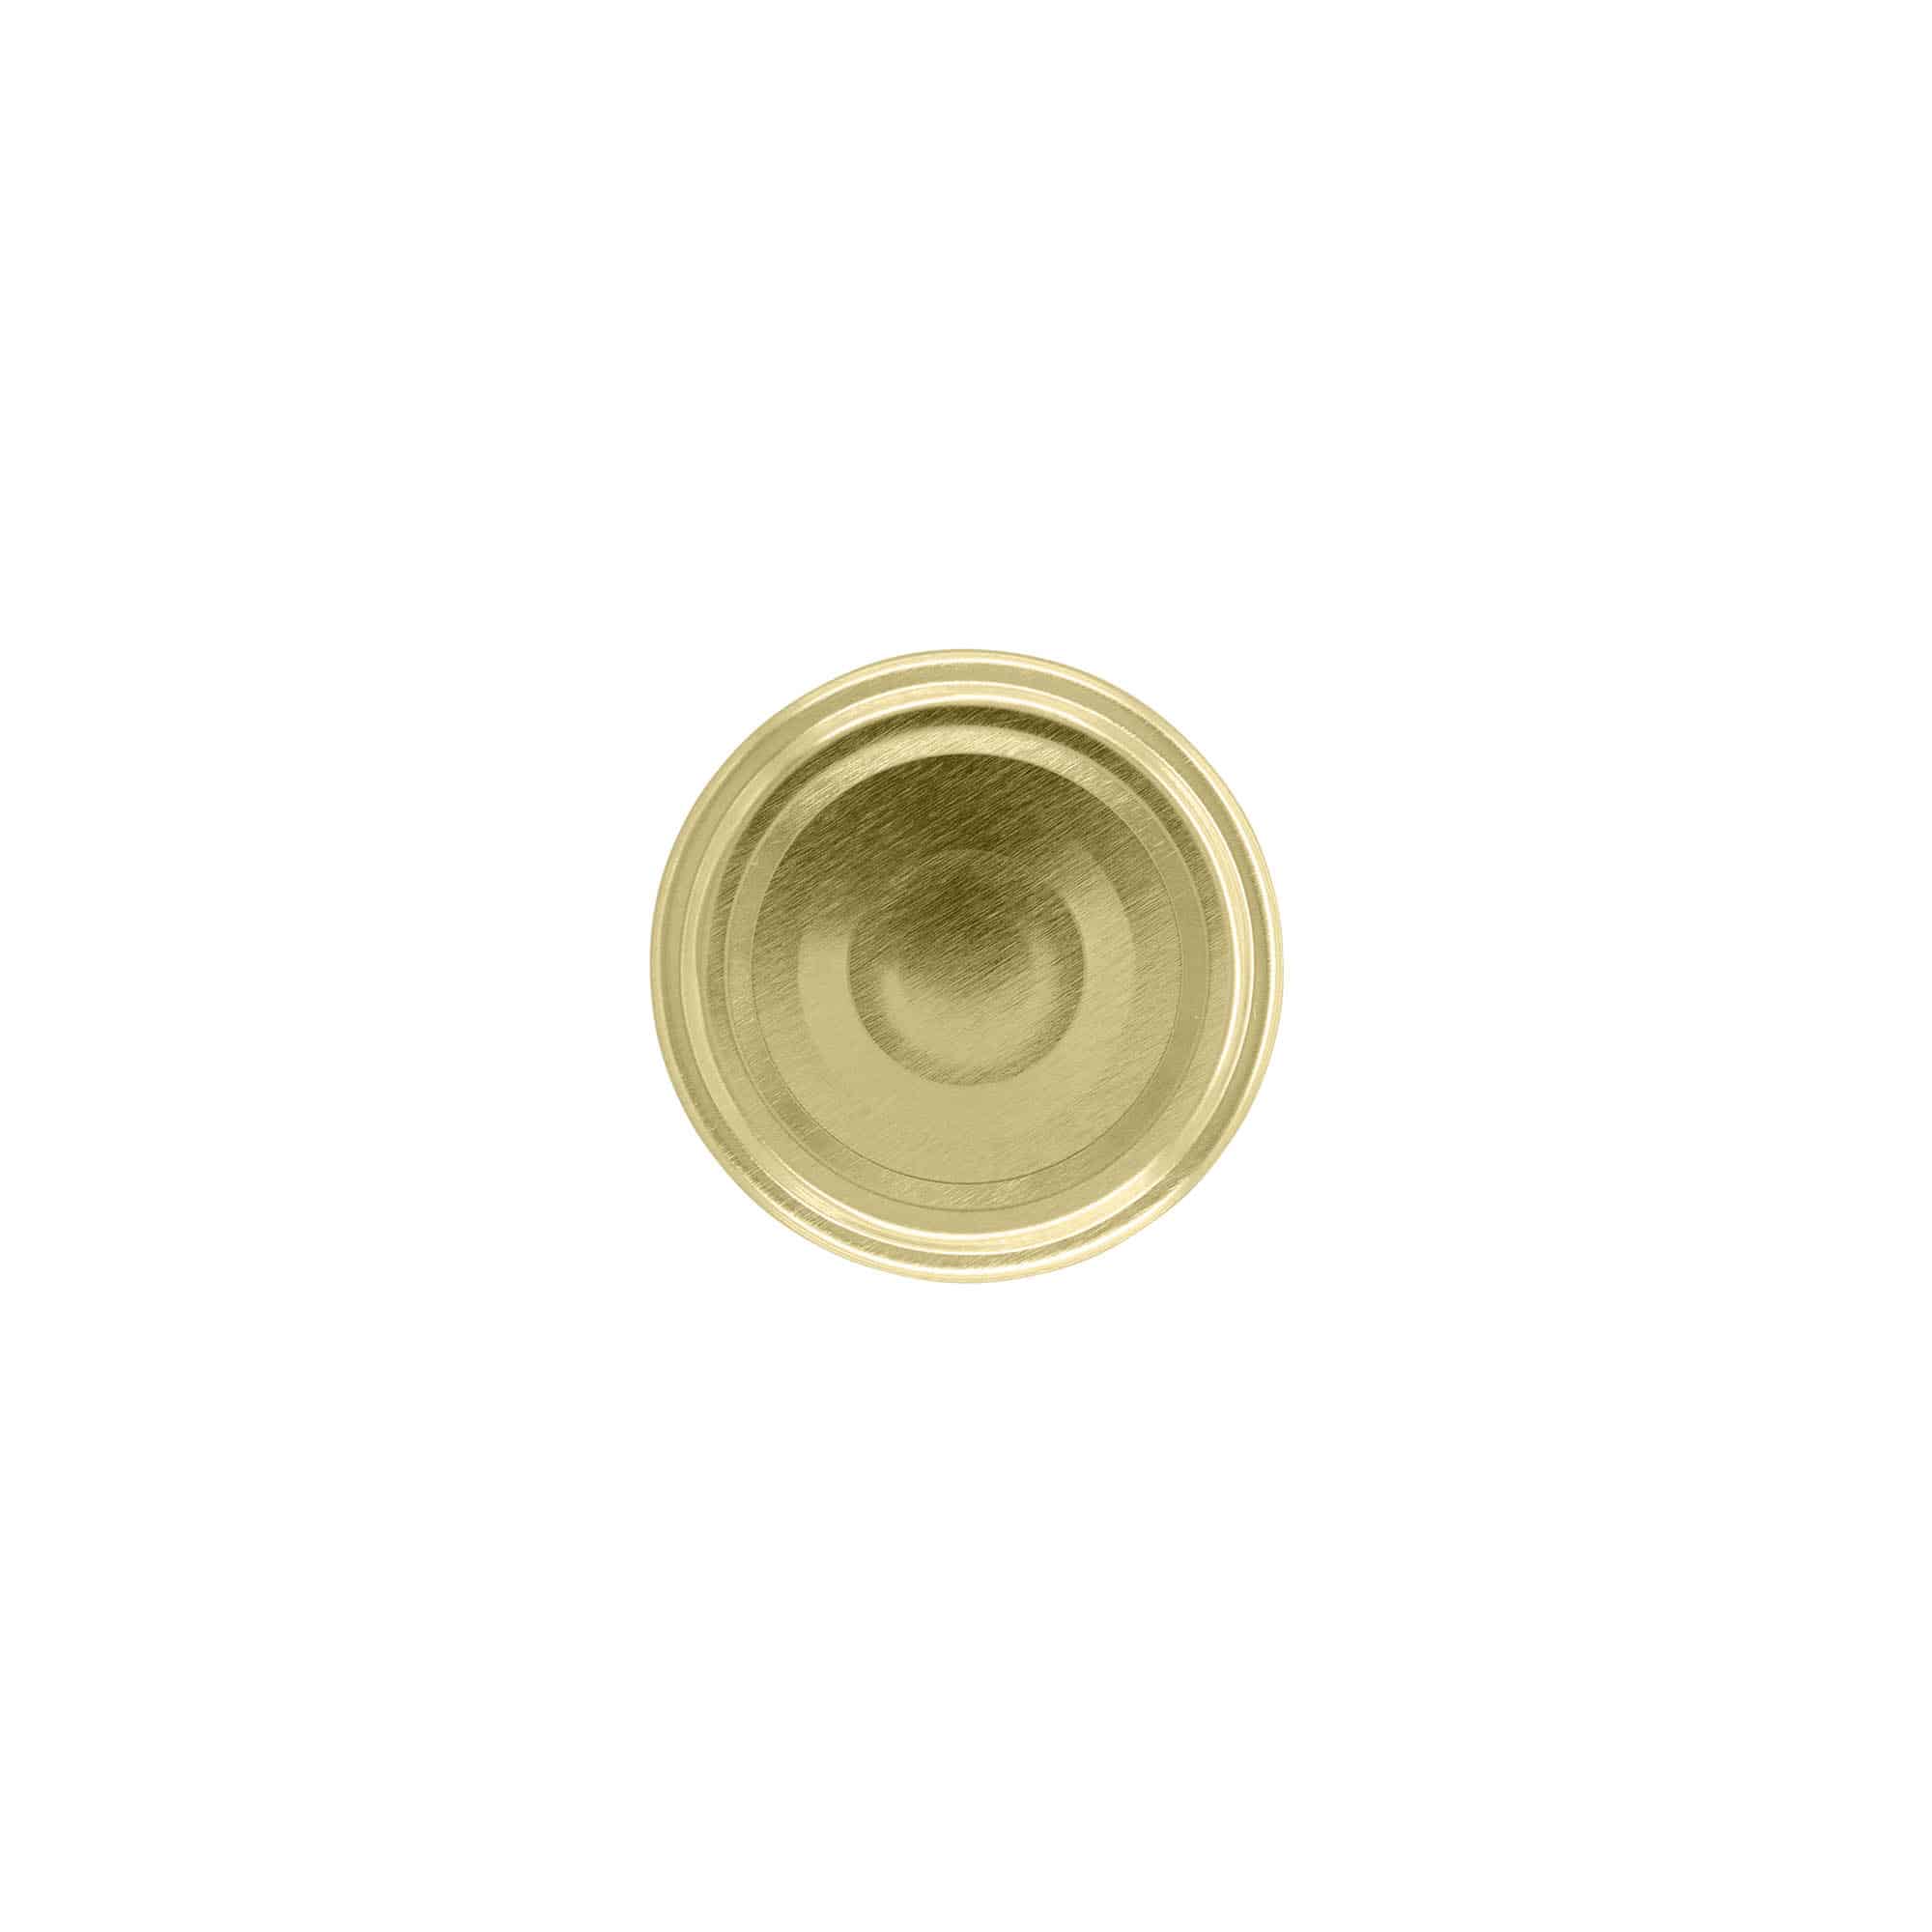 Twist off lid, tinplate, gold, for opening: TO 48